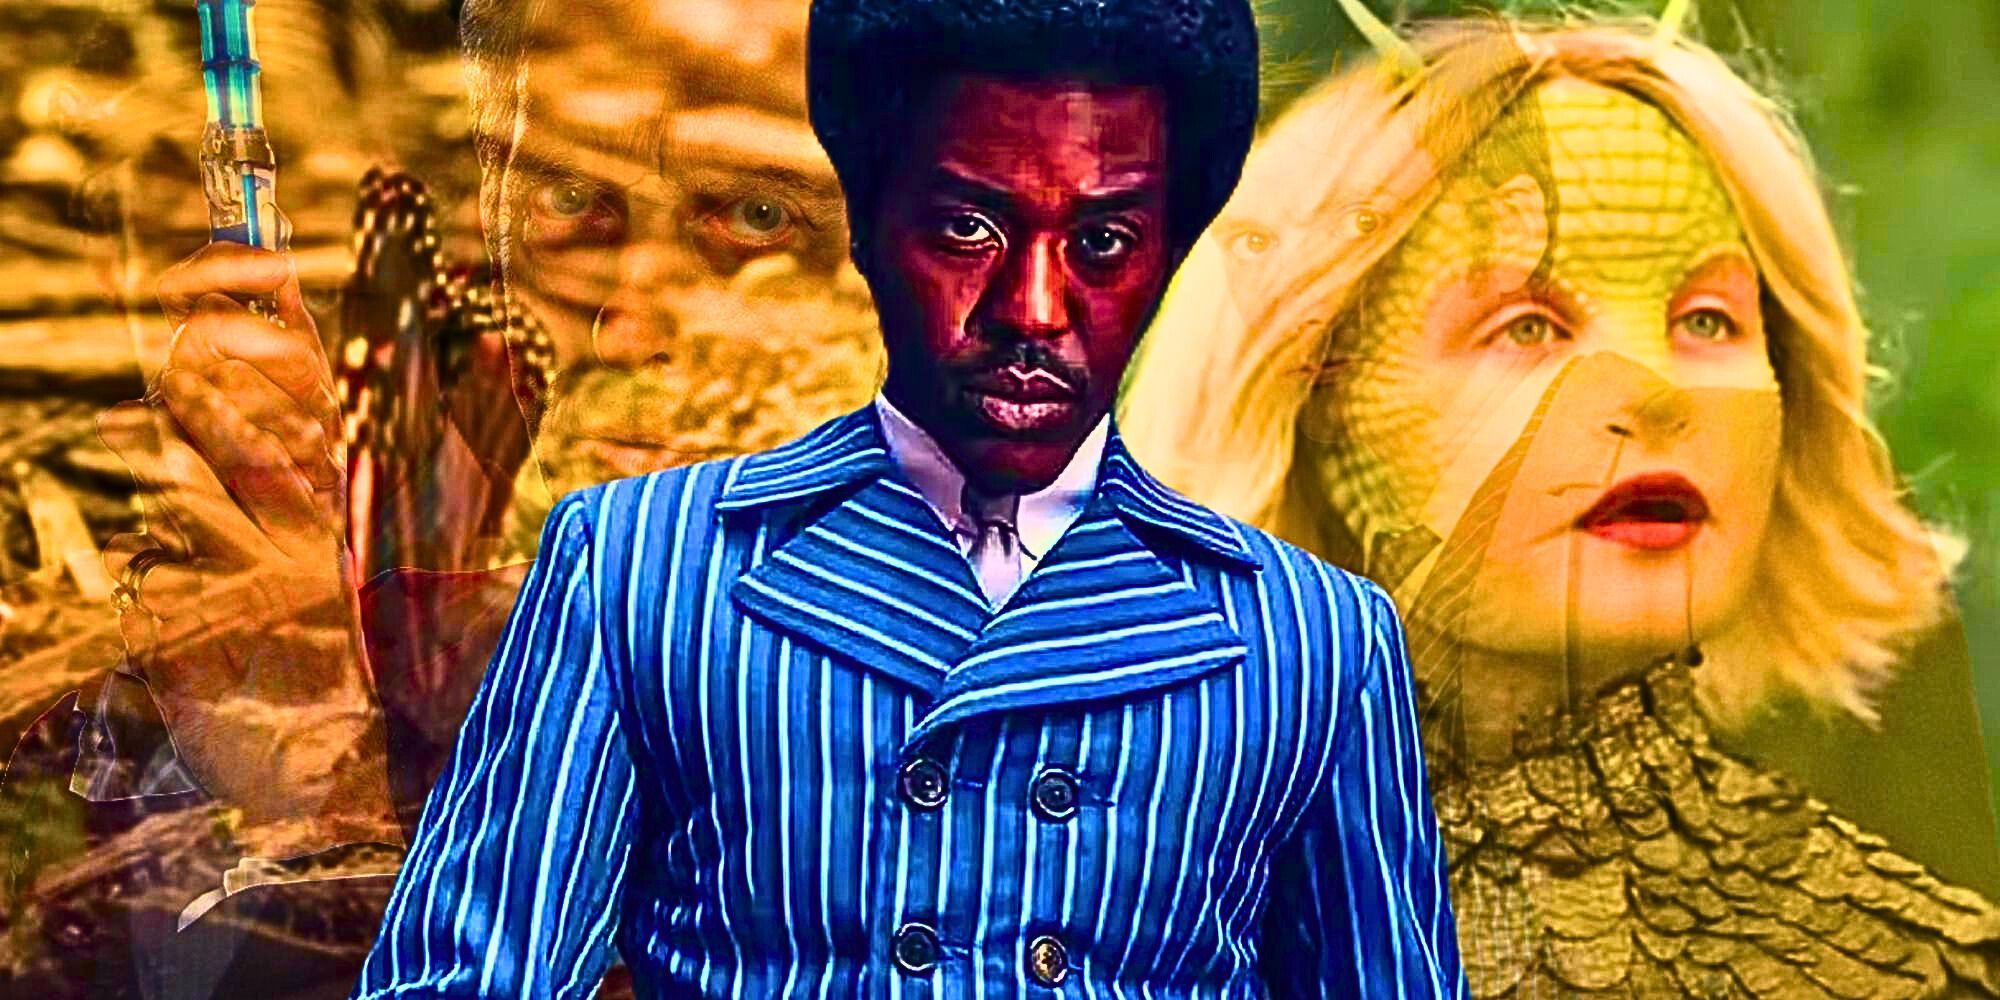 A custom image of Ncuti Gatwa as the Fifteenth Doctor against a backdrop of Doctor Who imagery